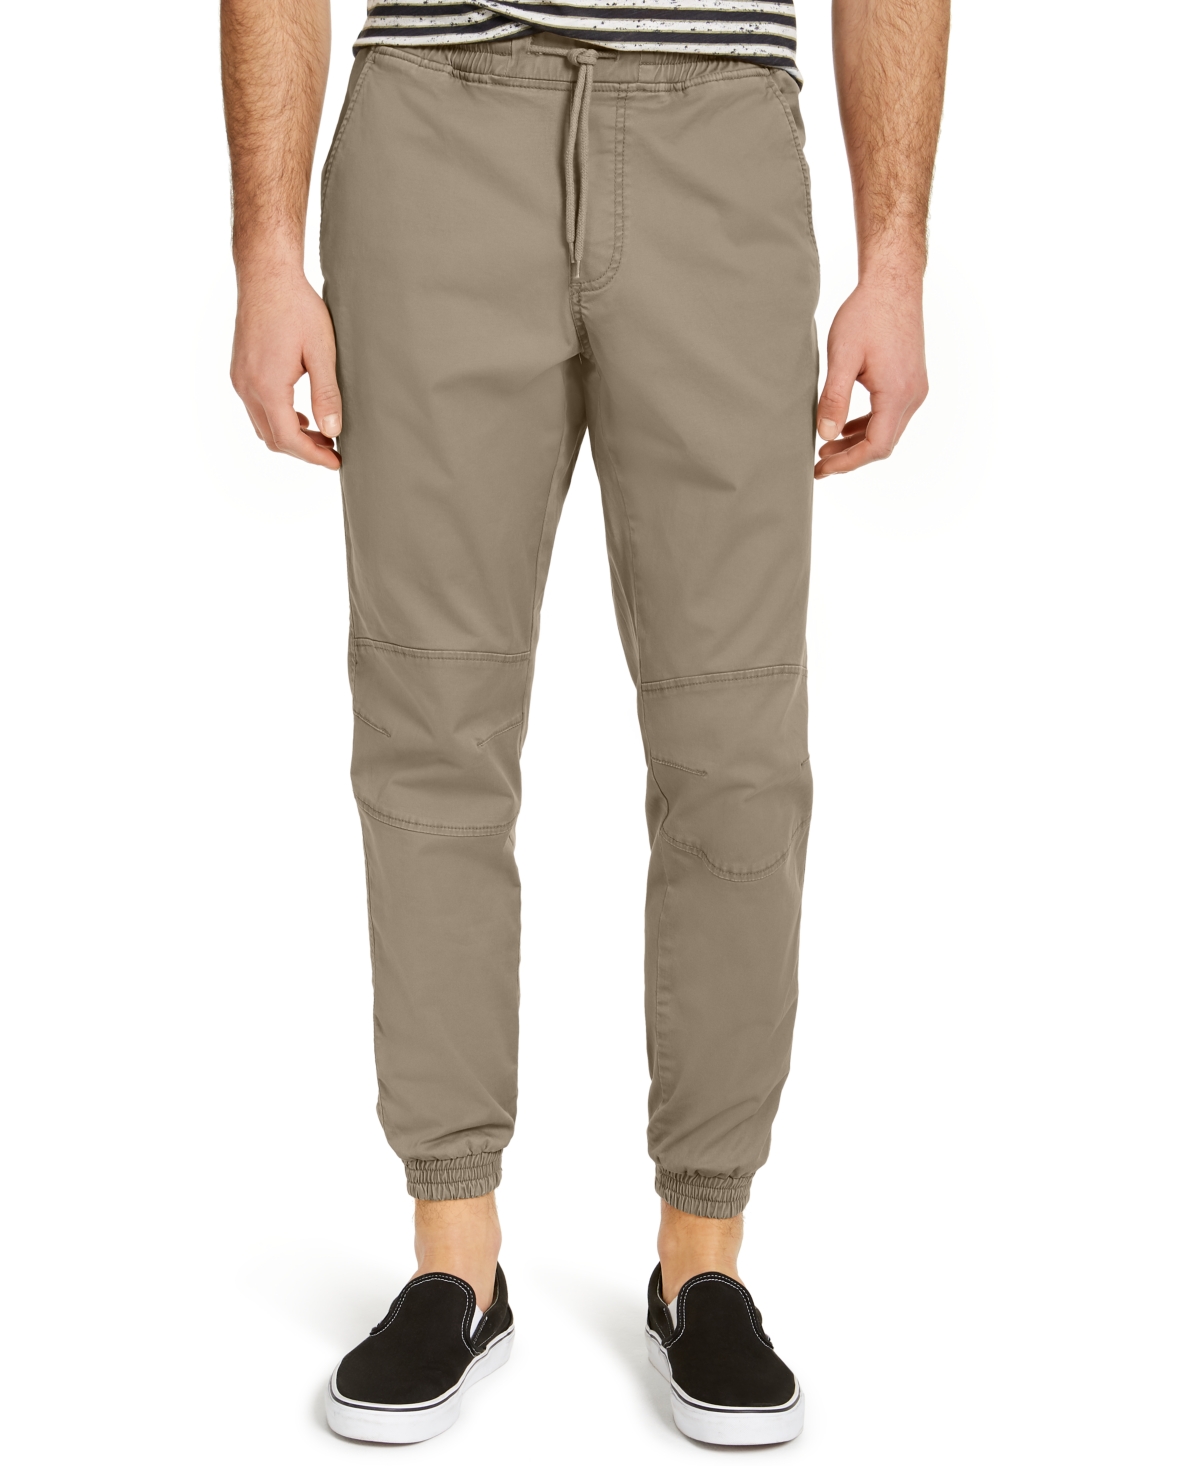 Sun + Stone Men's Articulated Jogger Pants, Created for Macy's on Macy ...